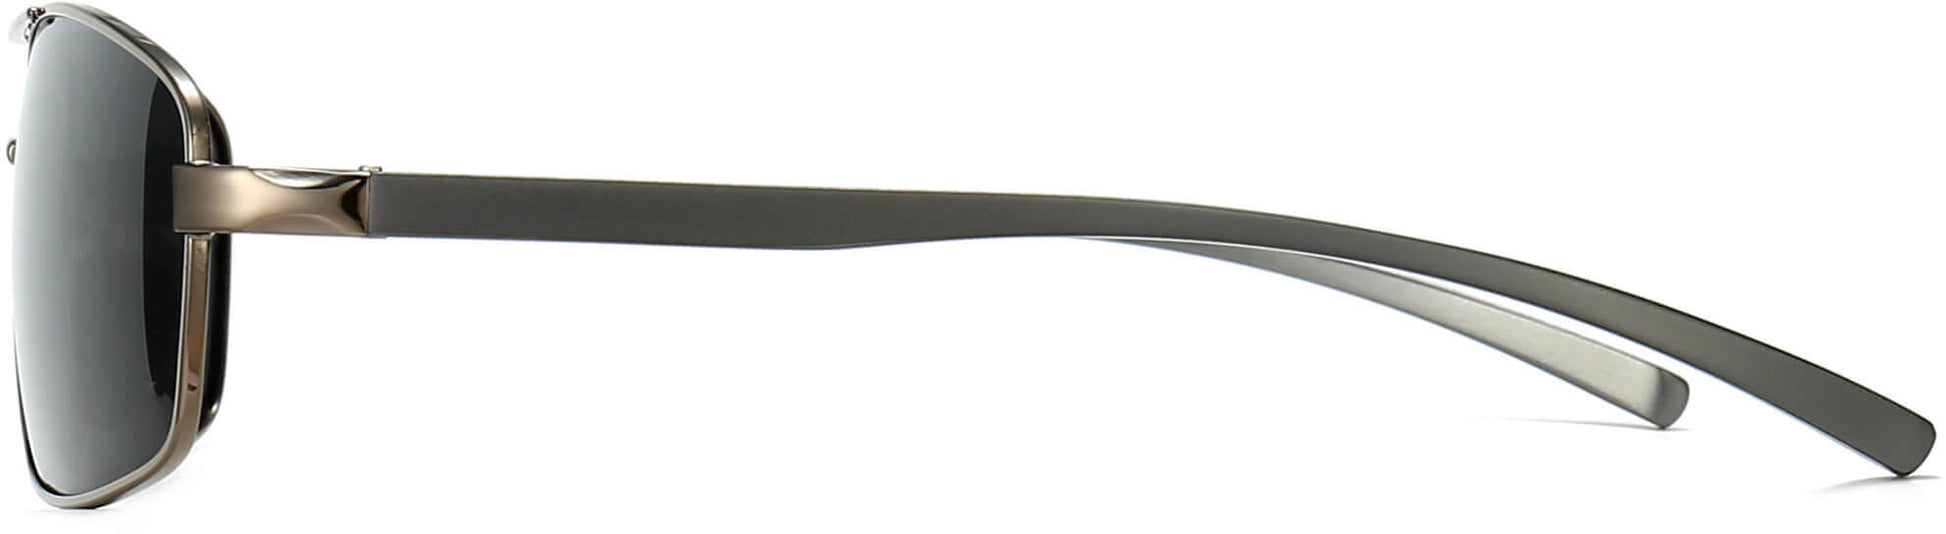 Madison Black Stainless steel Sunglasses from ANRRI, side view